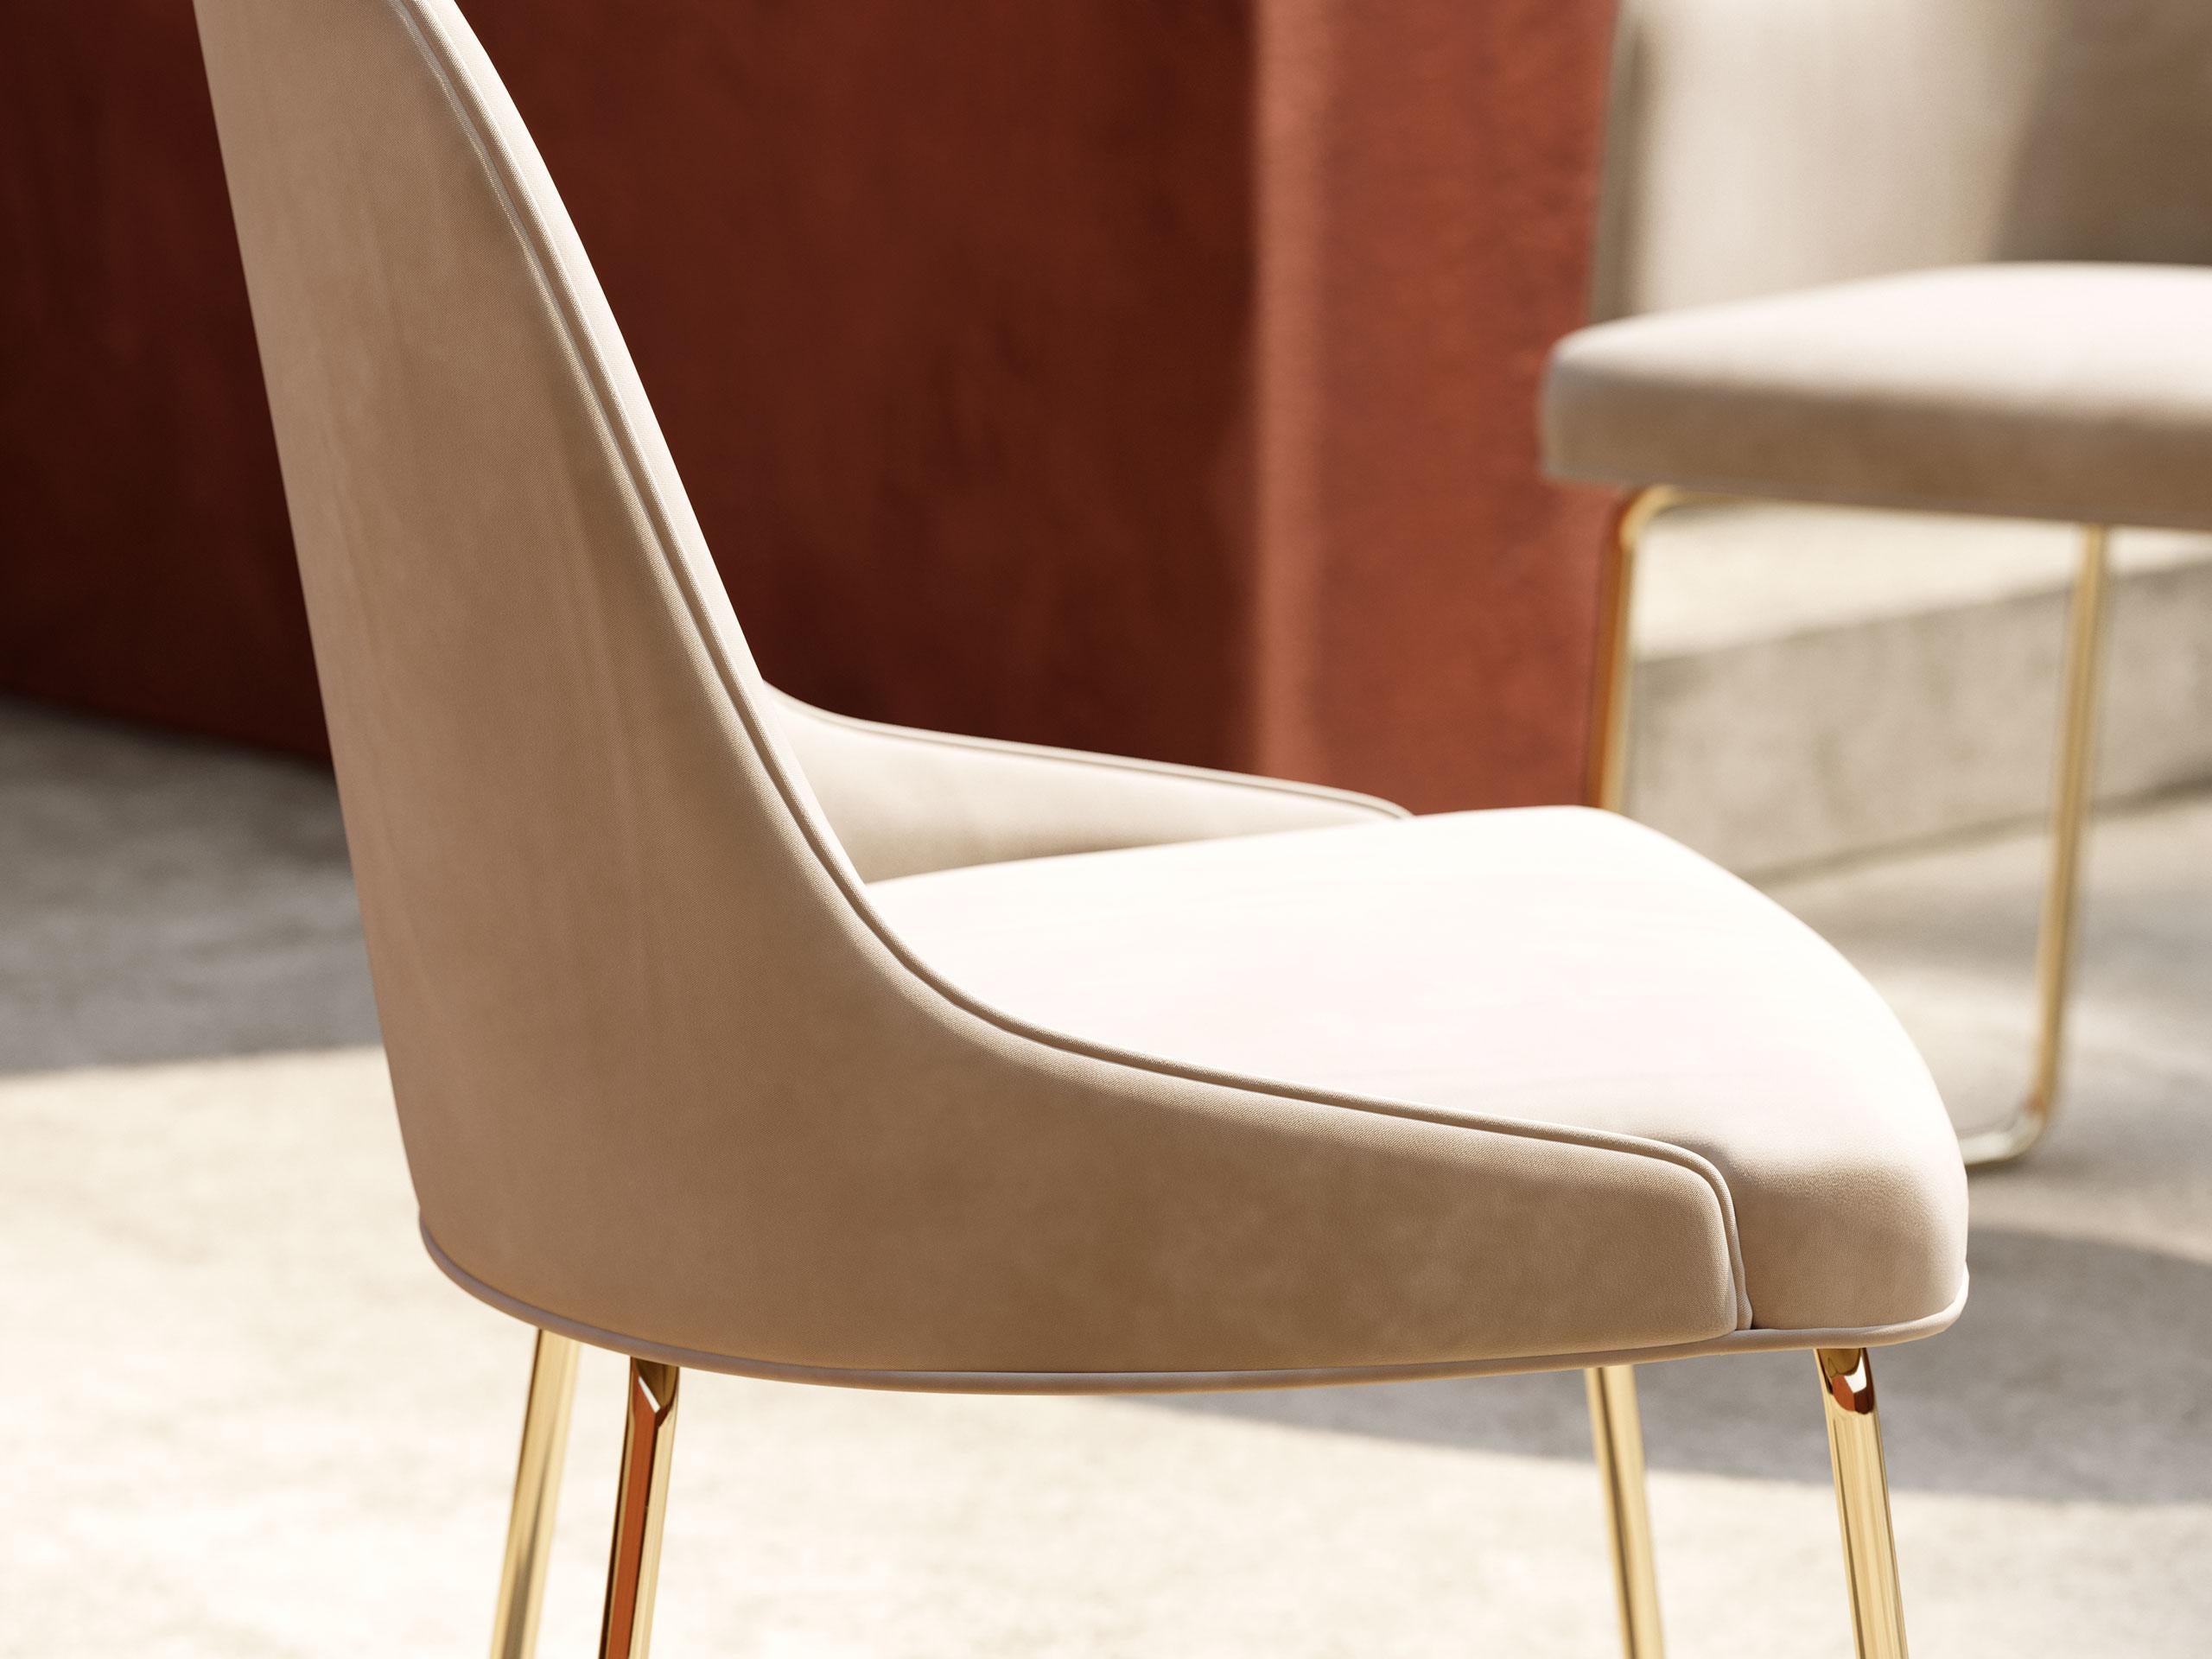 Modern Set of 8 Contemporary Dining Chairs, Champagne/Gold